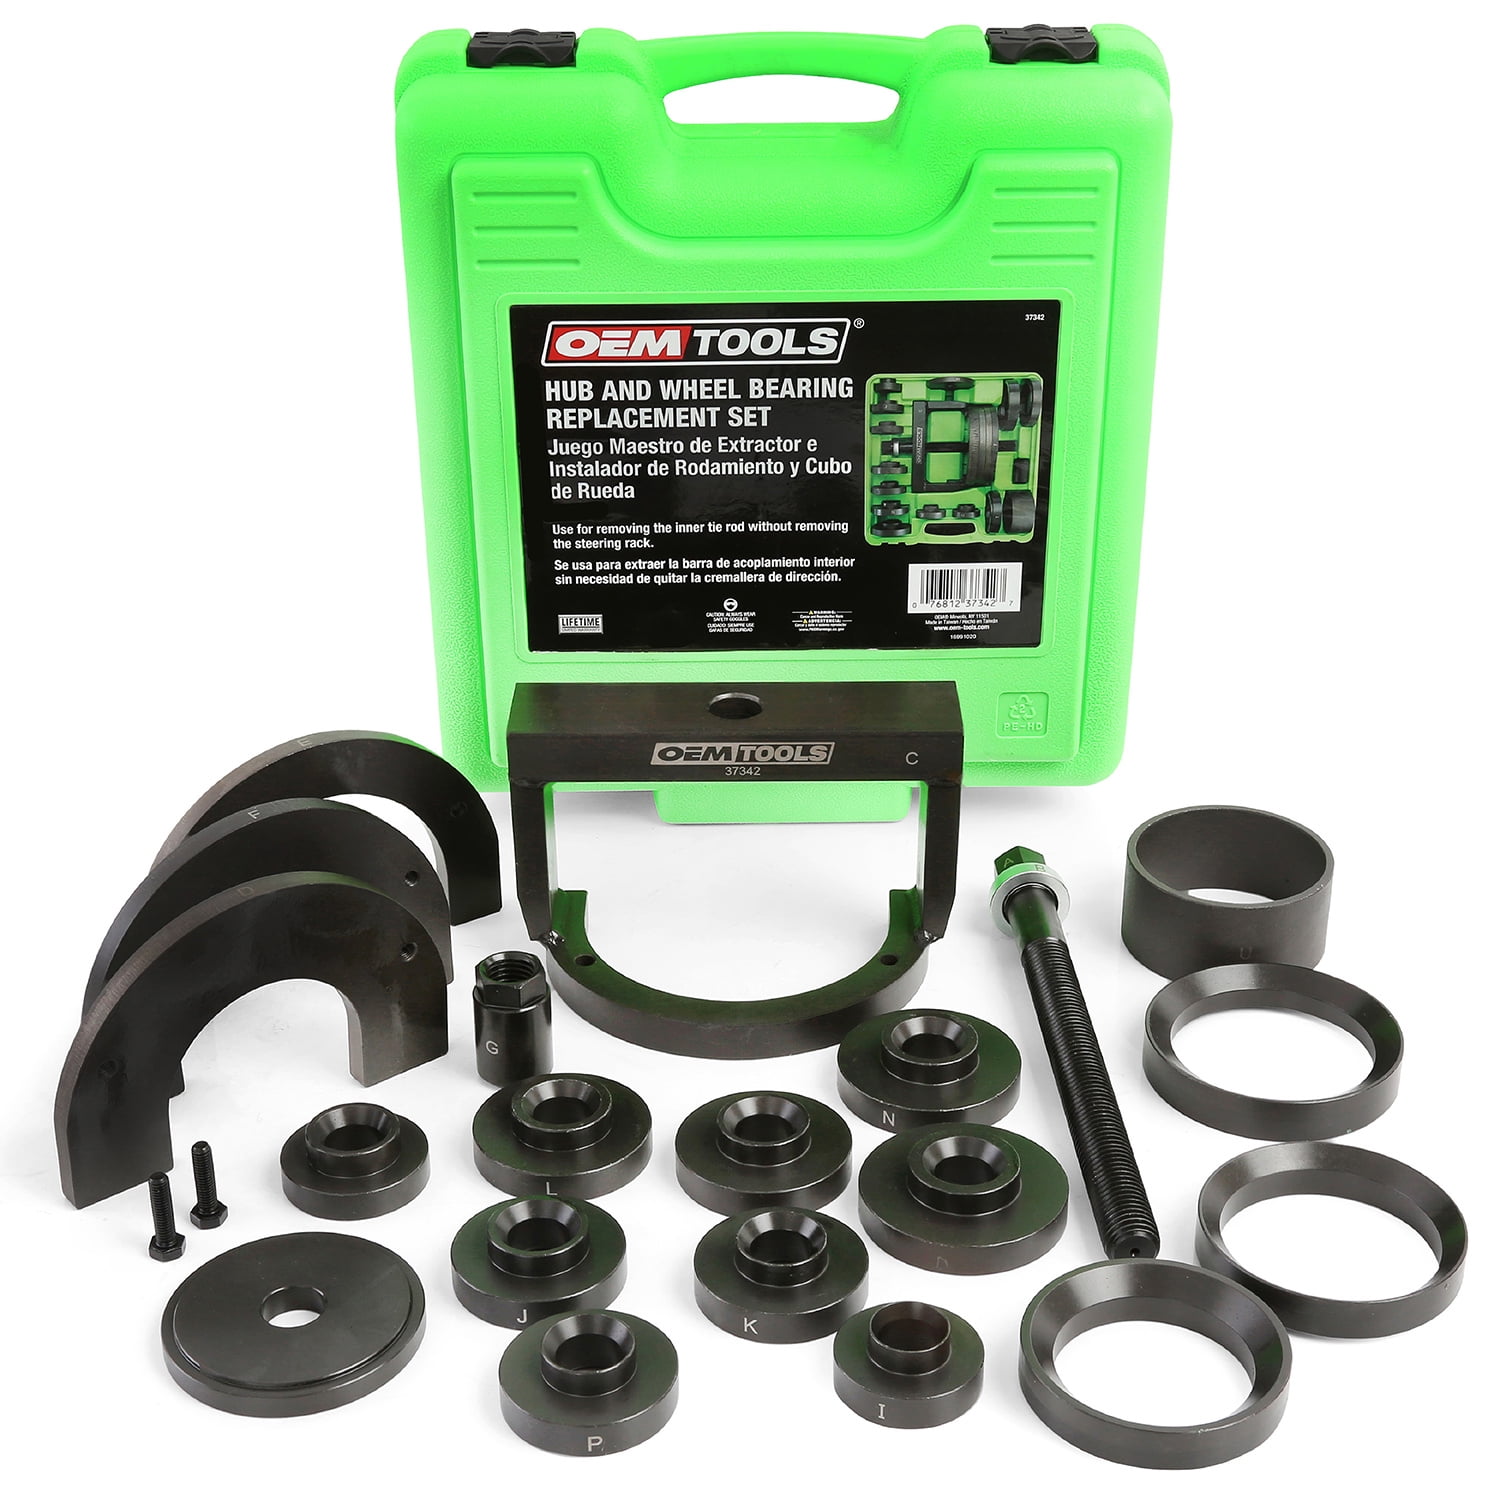 OEMTOOLS 27213 Master Wheel Hub and Bearing Remover and